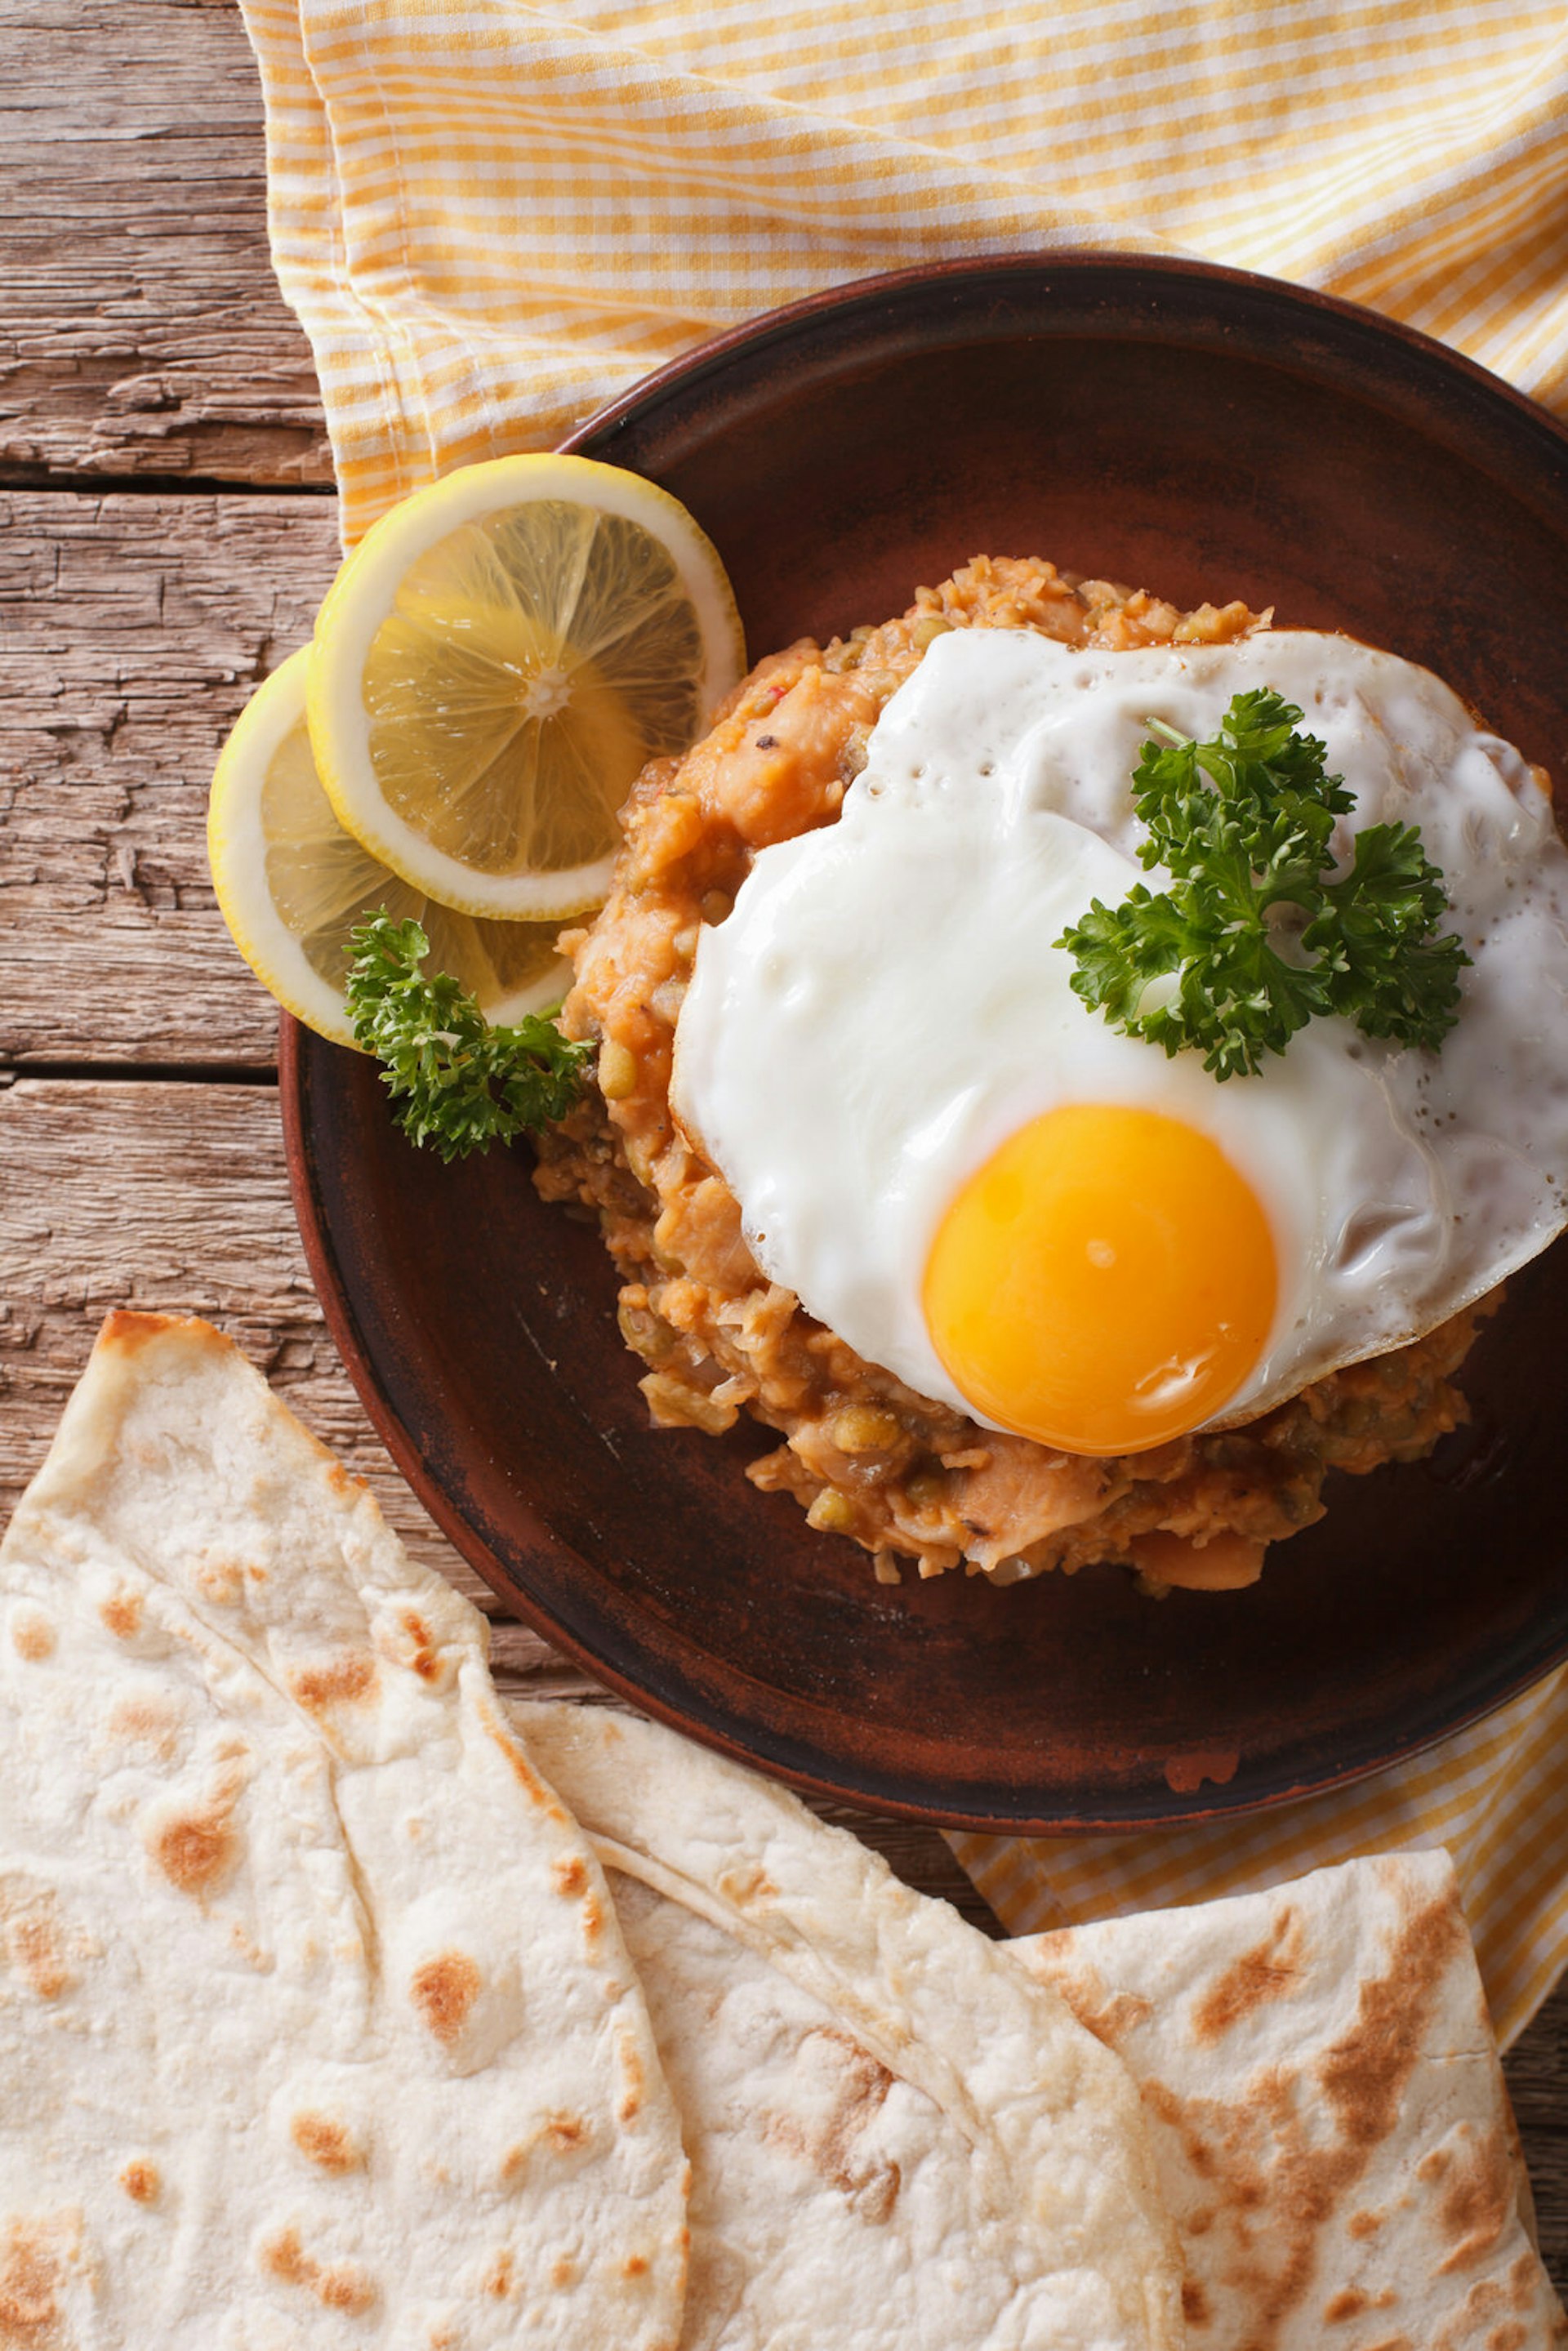 Aerial view of fuul medames with a fried egg and bread on a brown plate garnished with lemon slices © ALLEKO / Getty Images